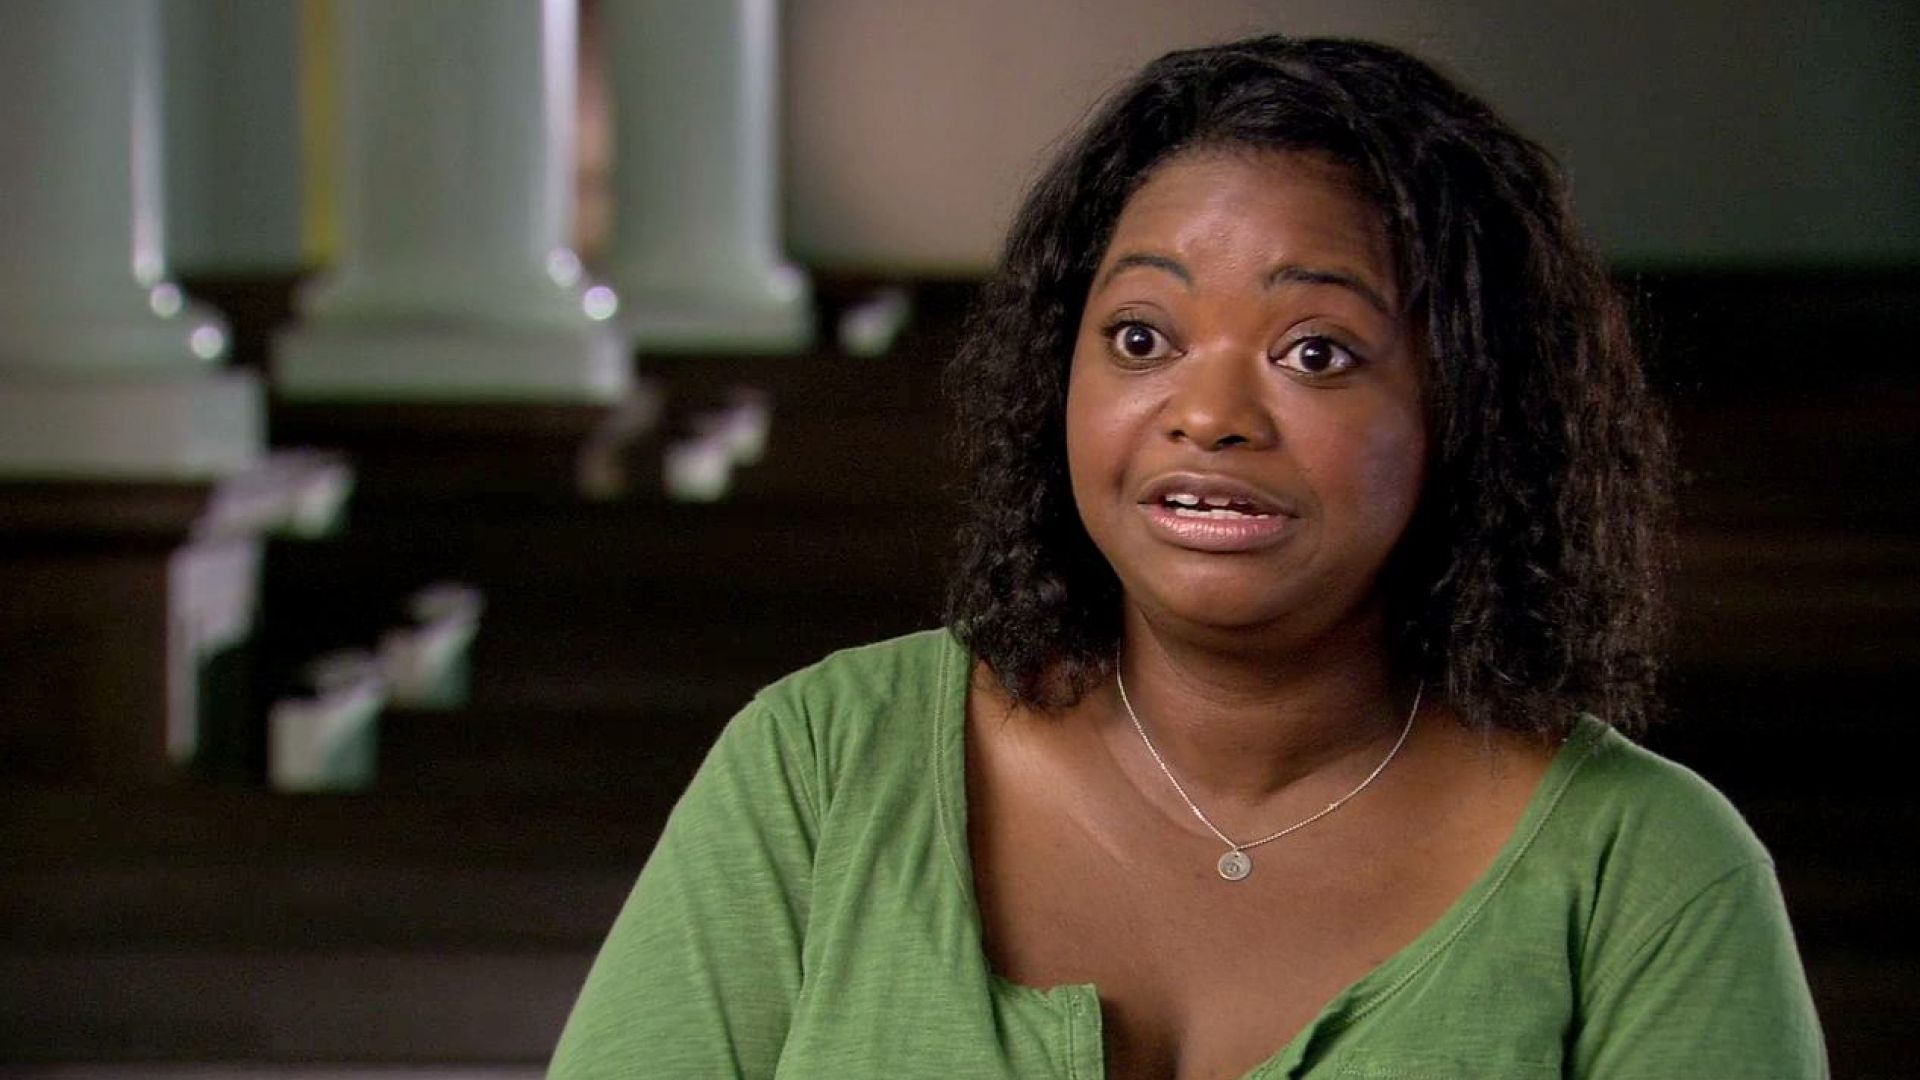 Octavia Spencer talks about playing Minny in The Help